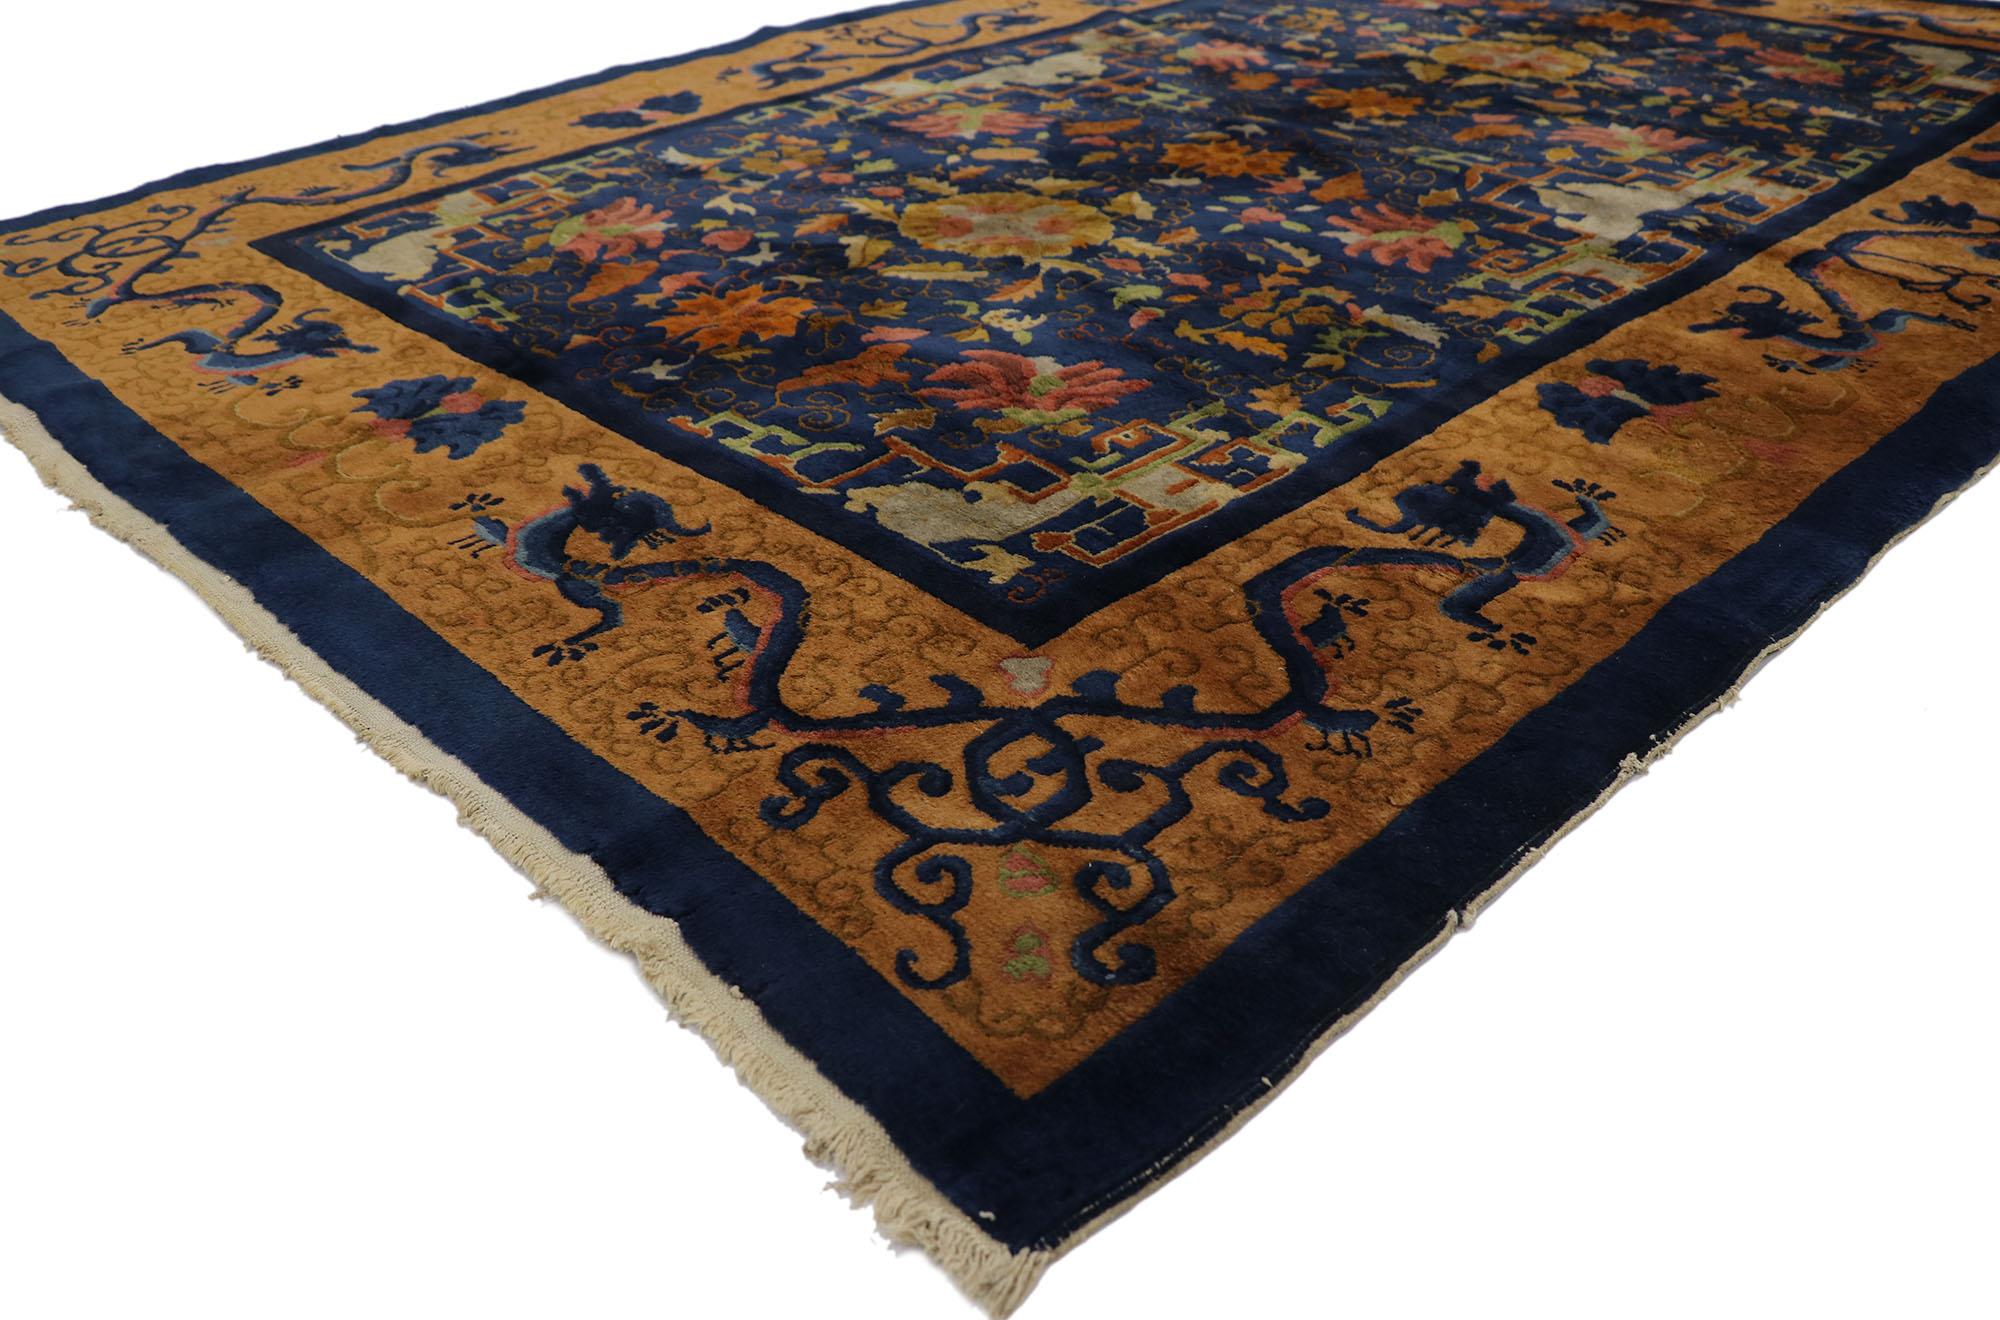 21679 Antique Chinese Art Deco Rug, 06'01 x 08'09. Chinese Art Deco rugs originated in China during the 1920s and 1930s, reflecting the bold geometric patterns, vibrant colors, and luxurious materials characteristic of the Art Deco movement. These